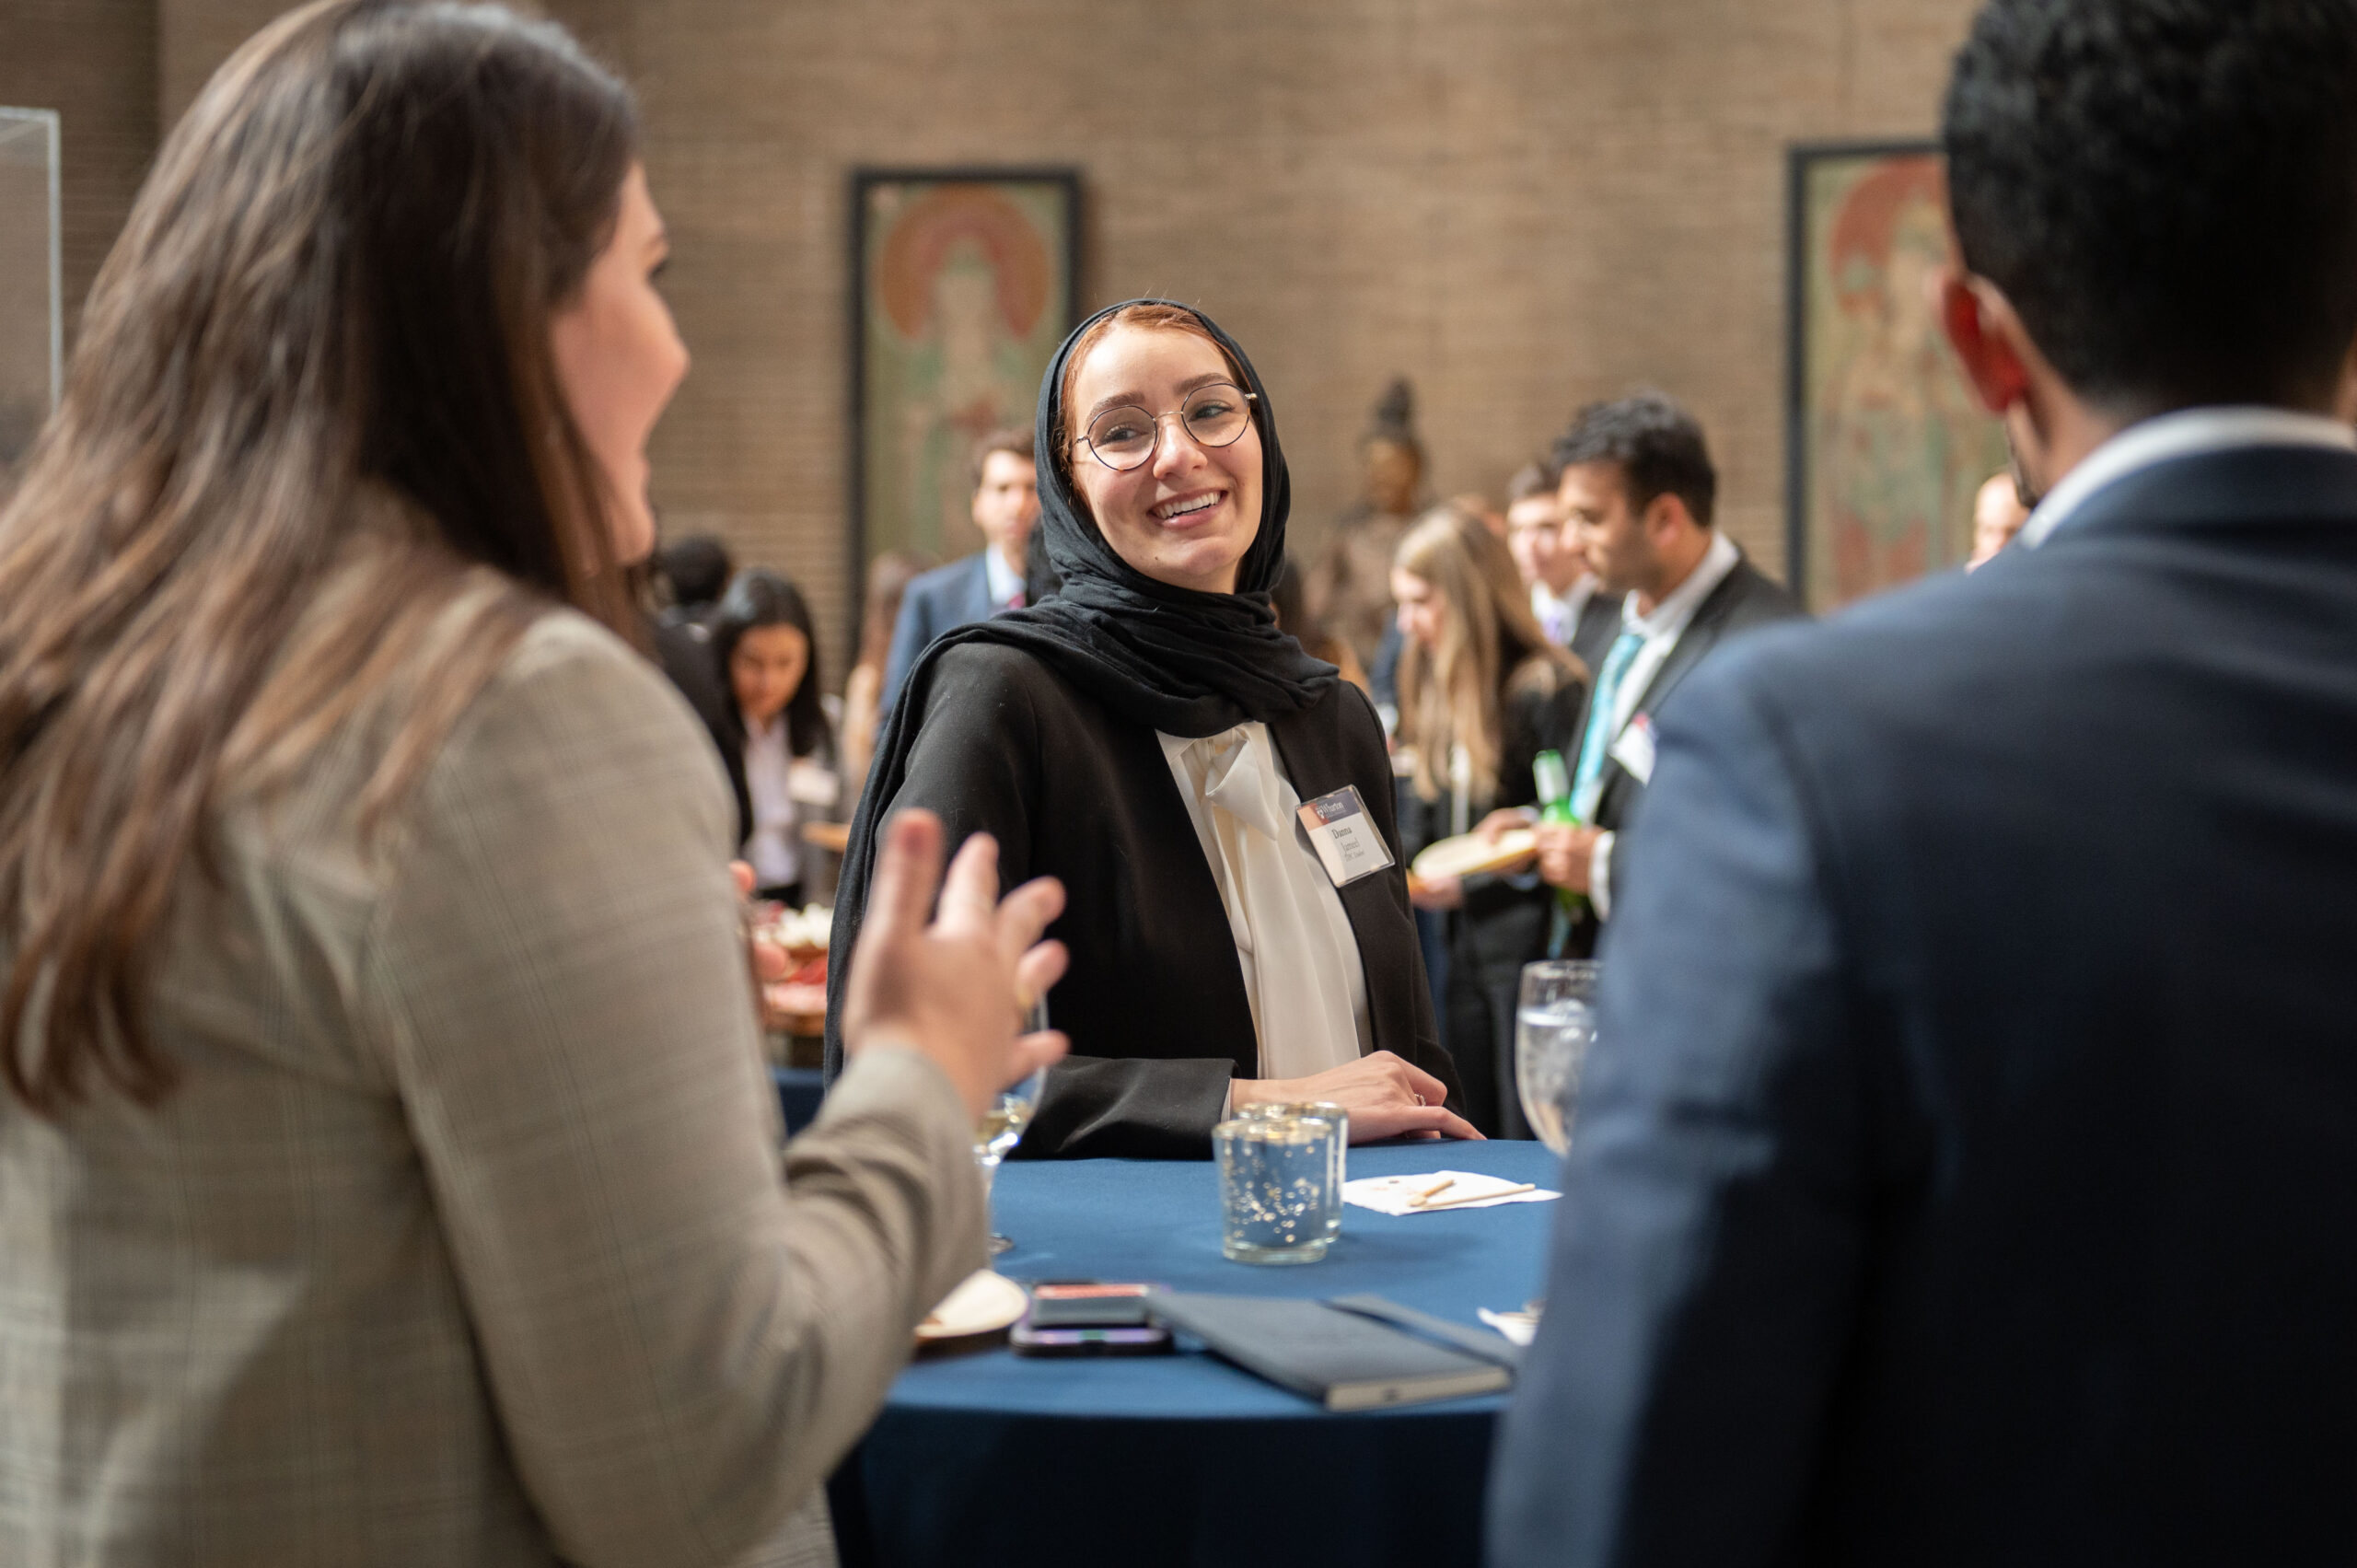 A group of students is smiling and talking at the evening reception. The shot focuses on one student smiling at a high table.